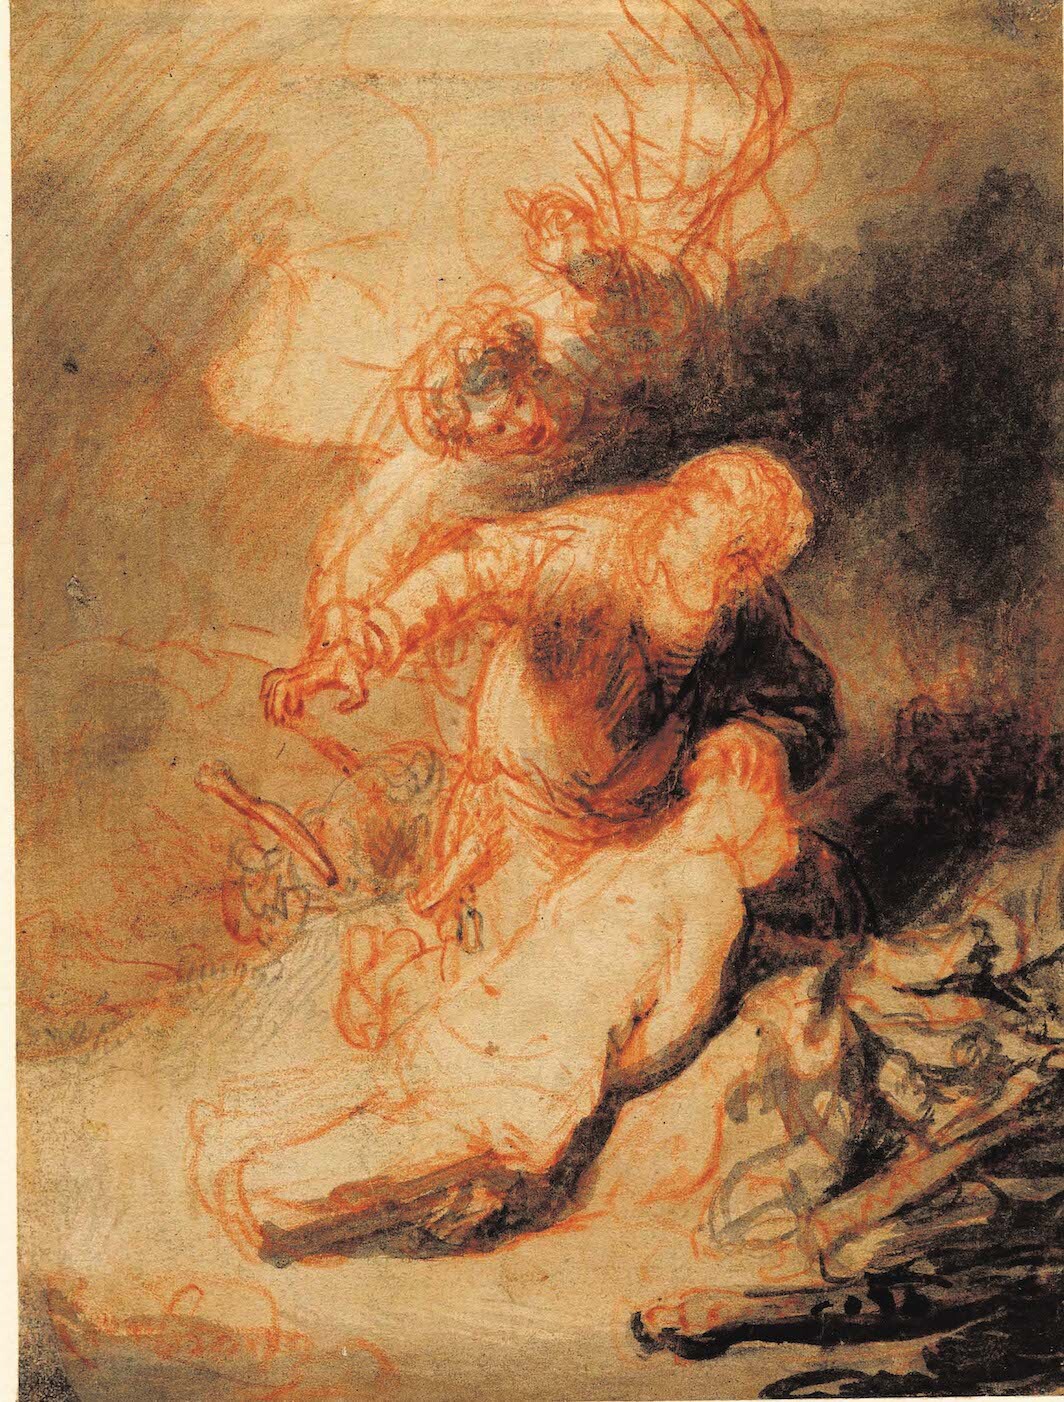 Rembrandt, The Angel preventing Abraham from sacrificing his son, Isaac, ca.1634-35, chalk and wash on paper, 7 3/4" × 5 3/4". Image: Wikicommons/The British Museum [[PD-US]].